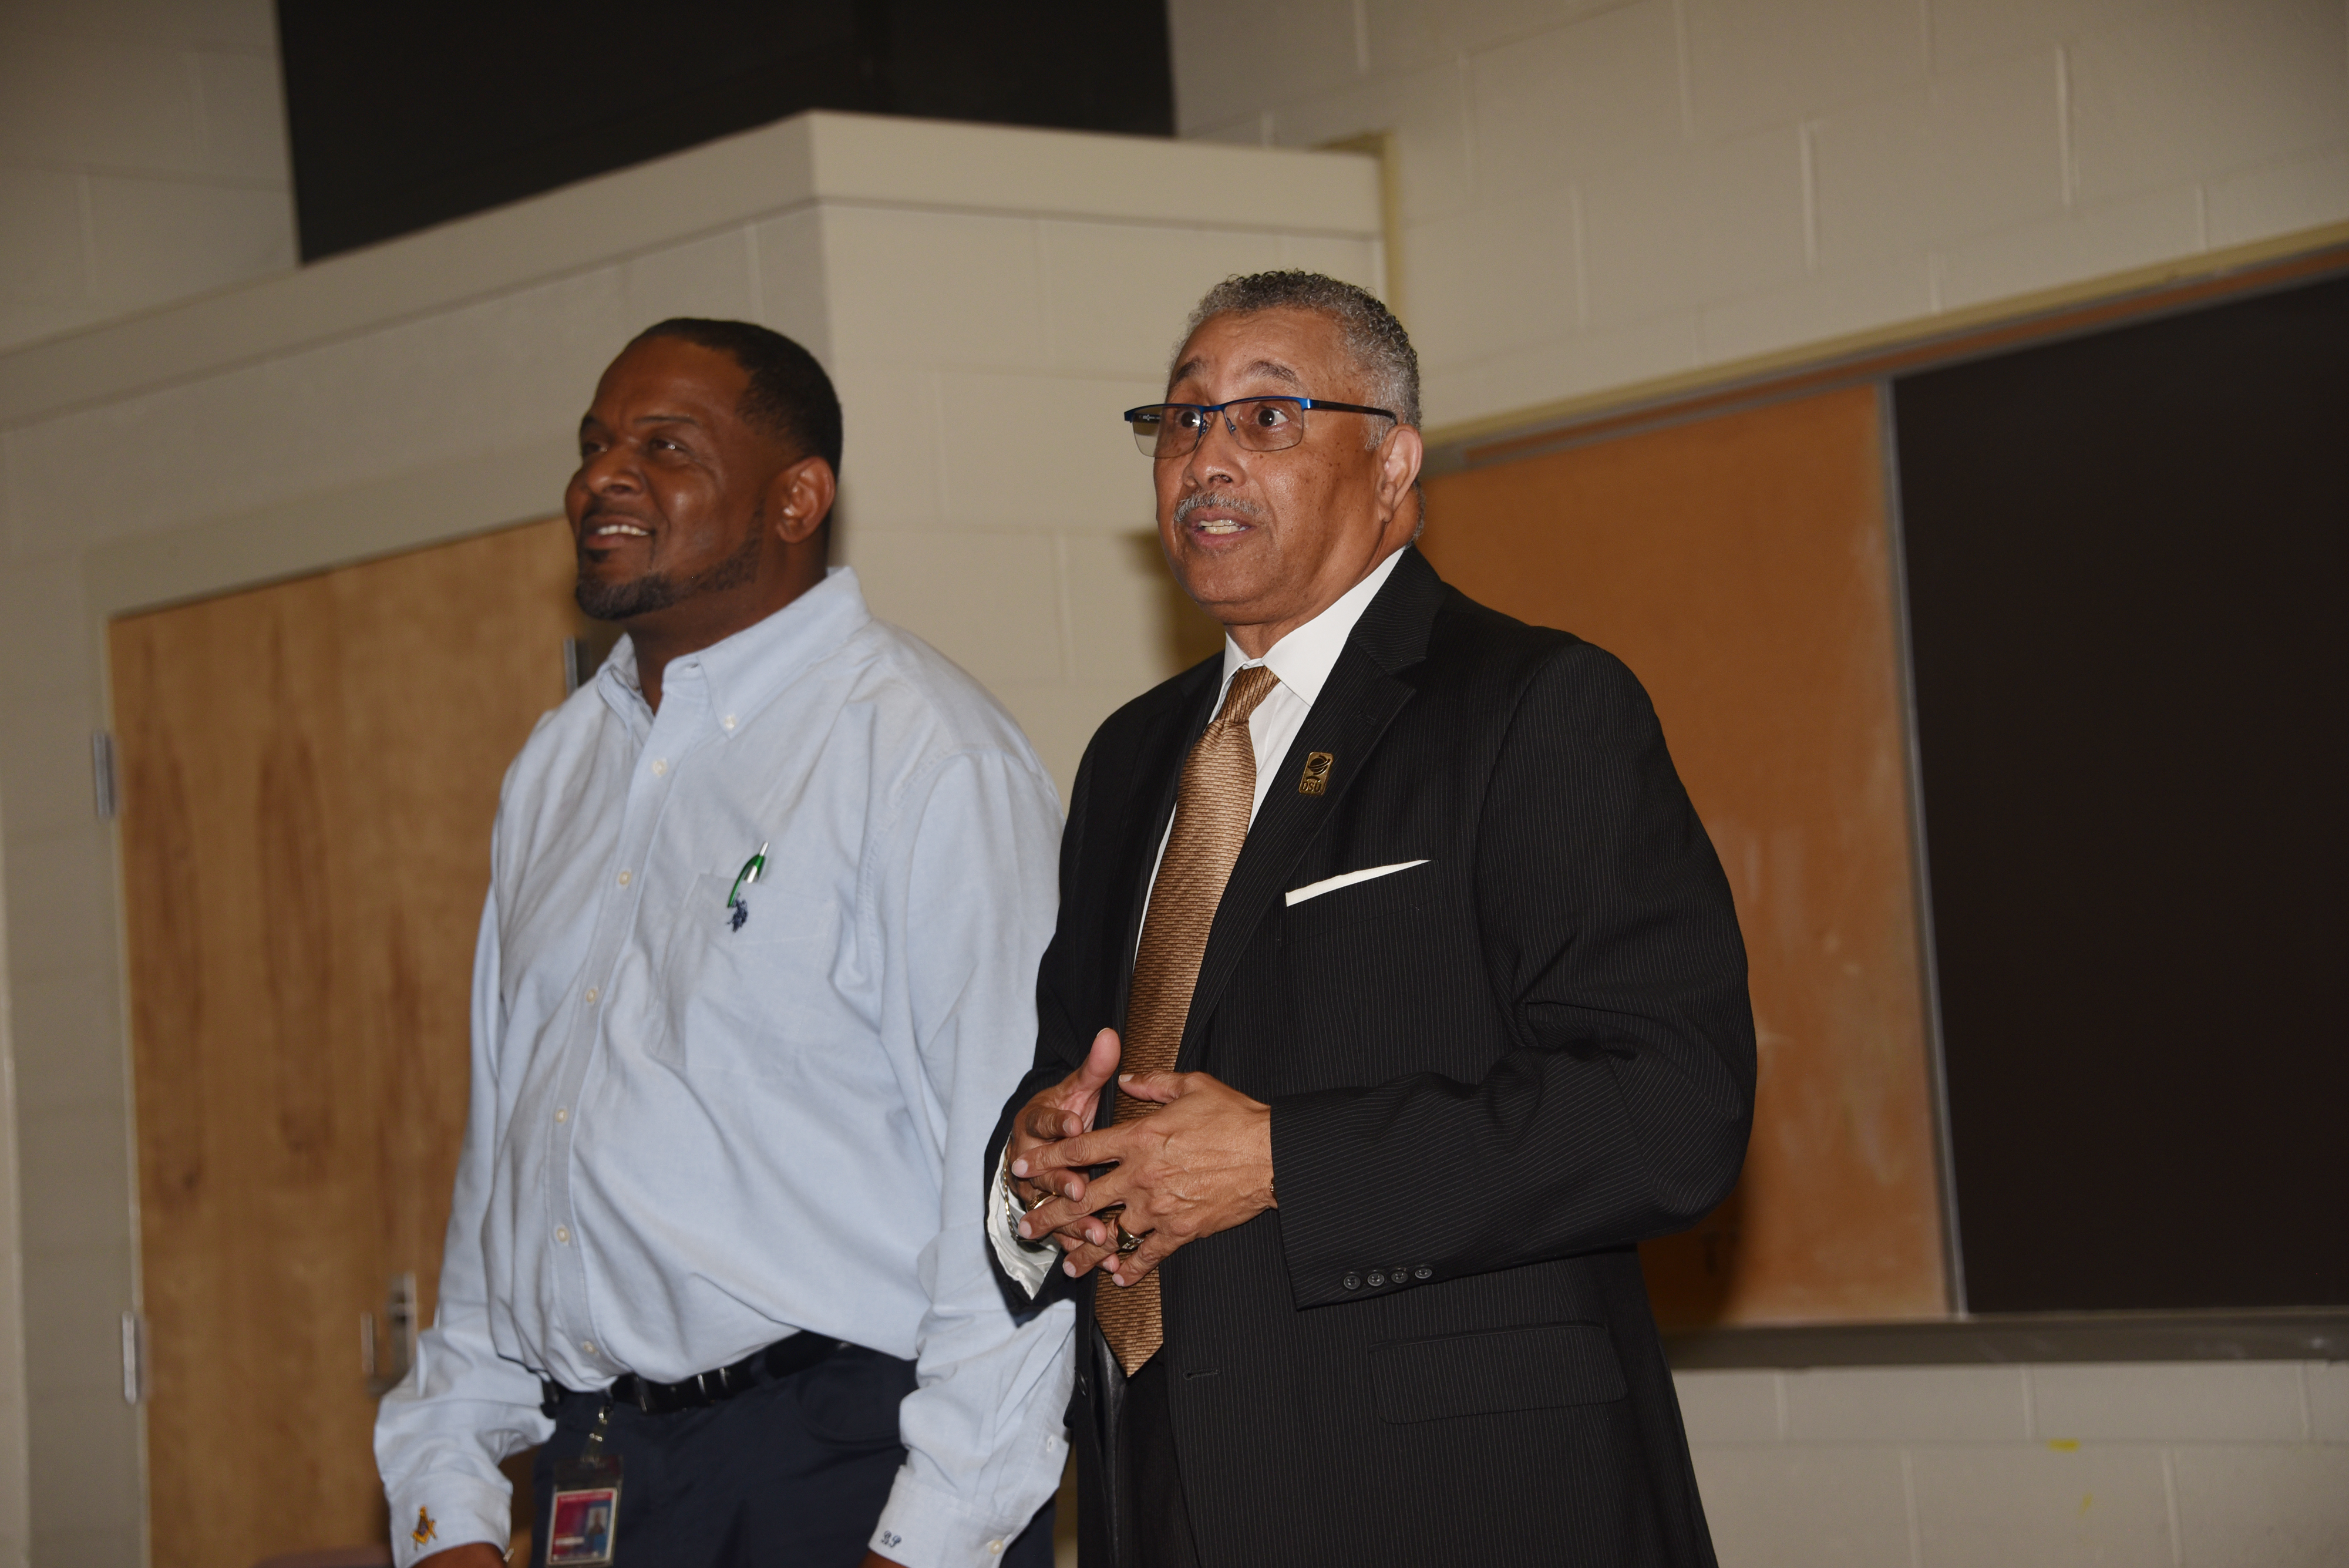 Herman Wood, the new Associate Vice President of Facilities Management, Planning and Construction, introduces himself to the custodial staff as Bernard Pratt, Senior Director of Plant Maintenance stands alongside.